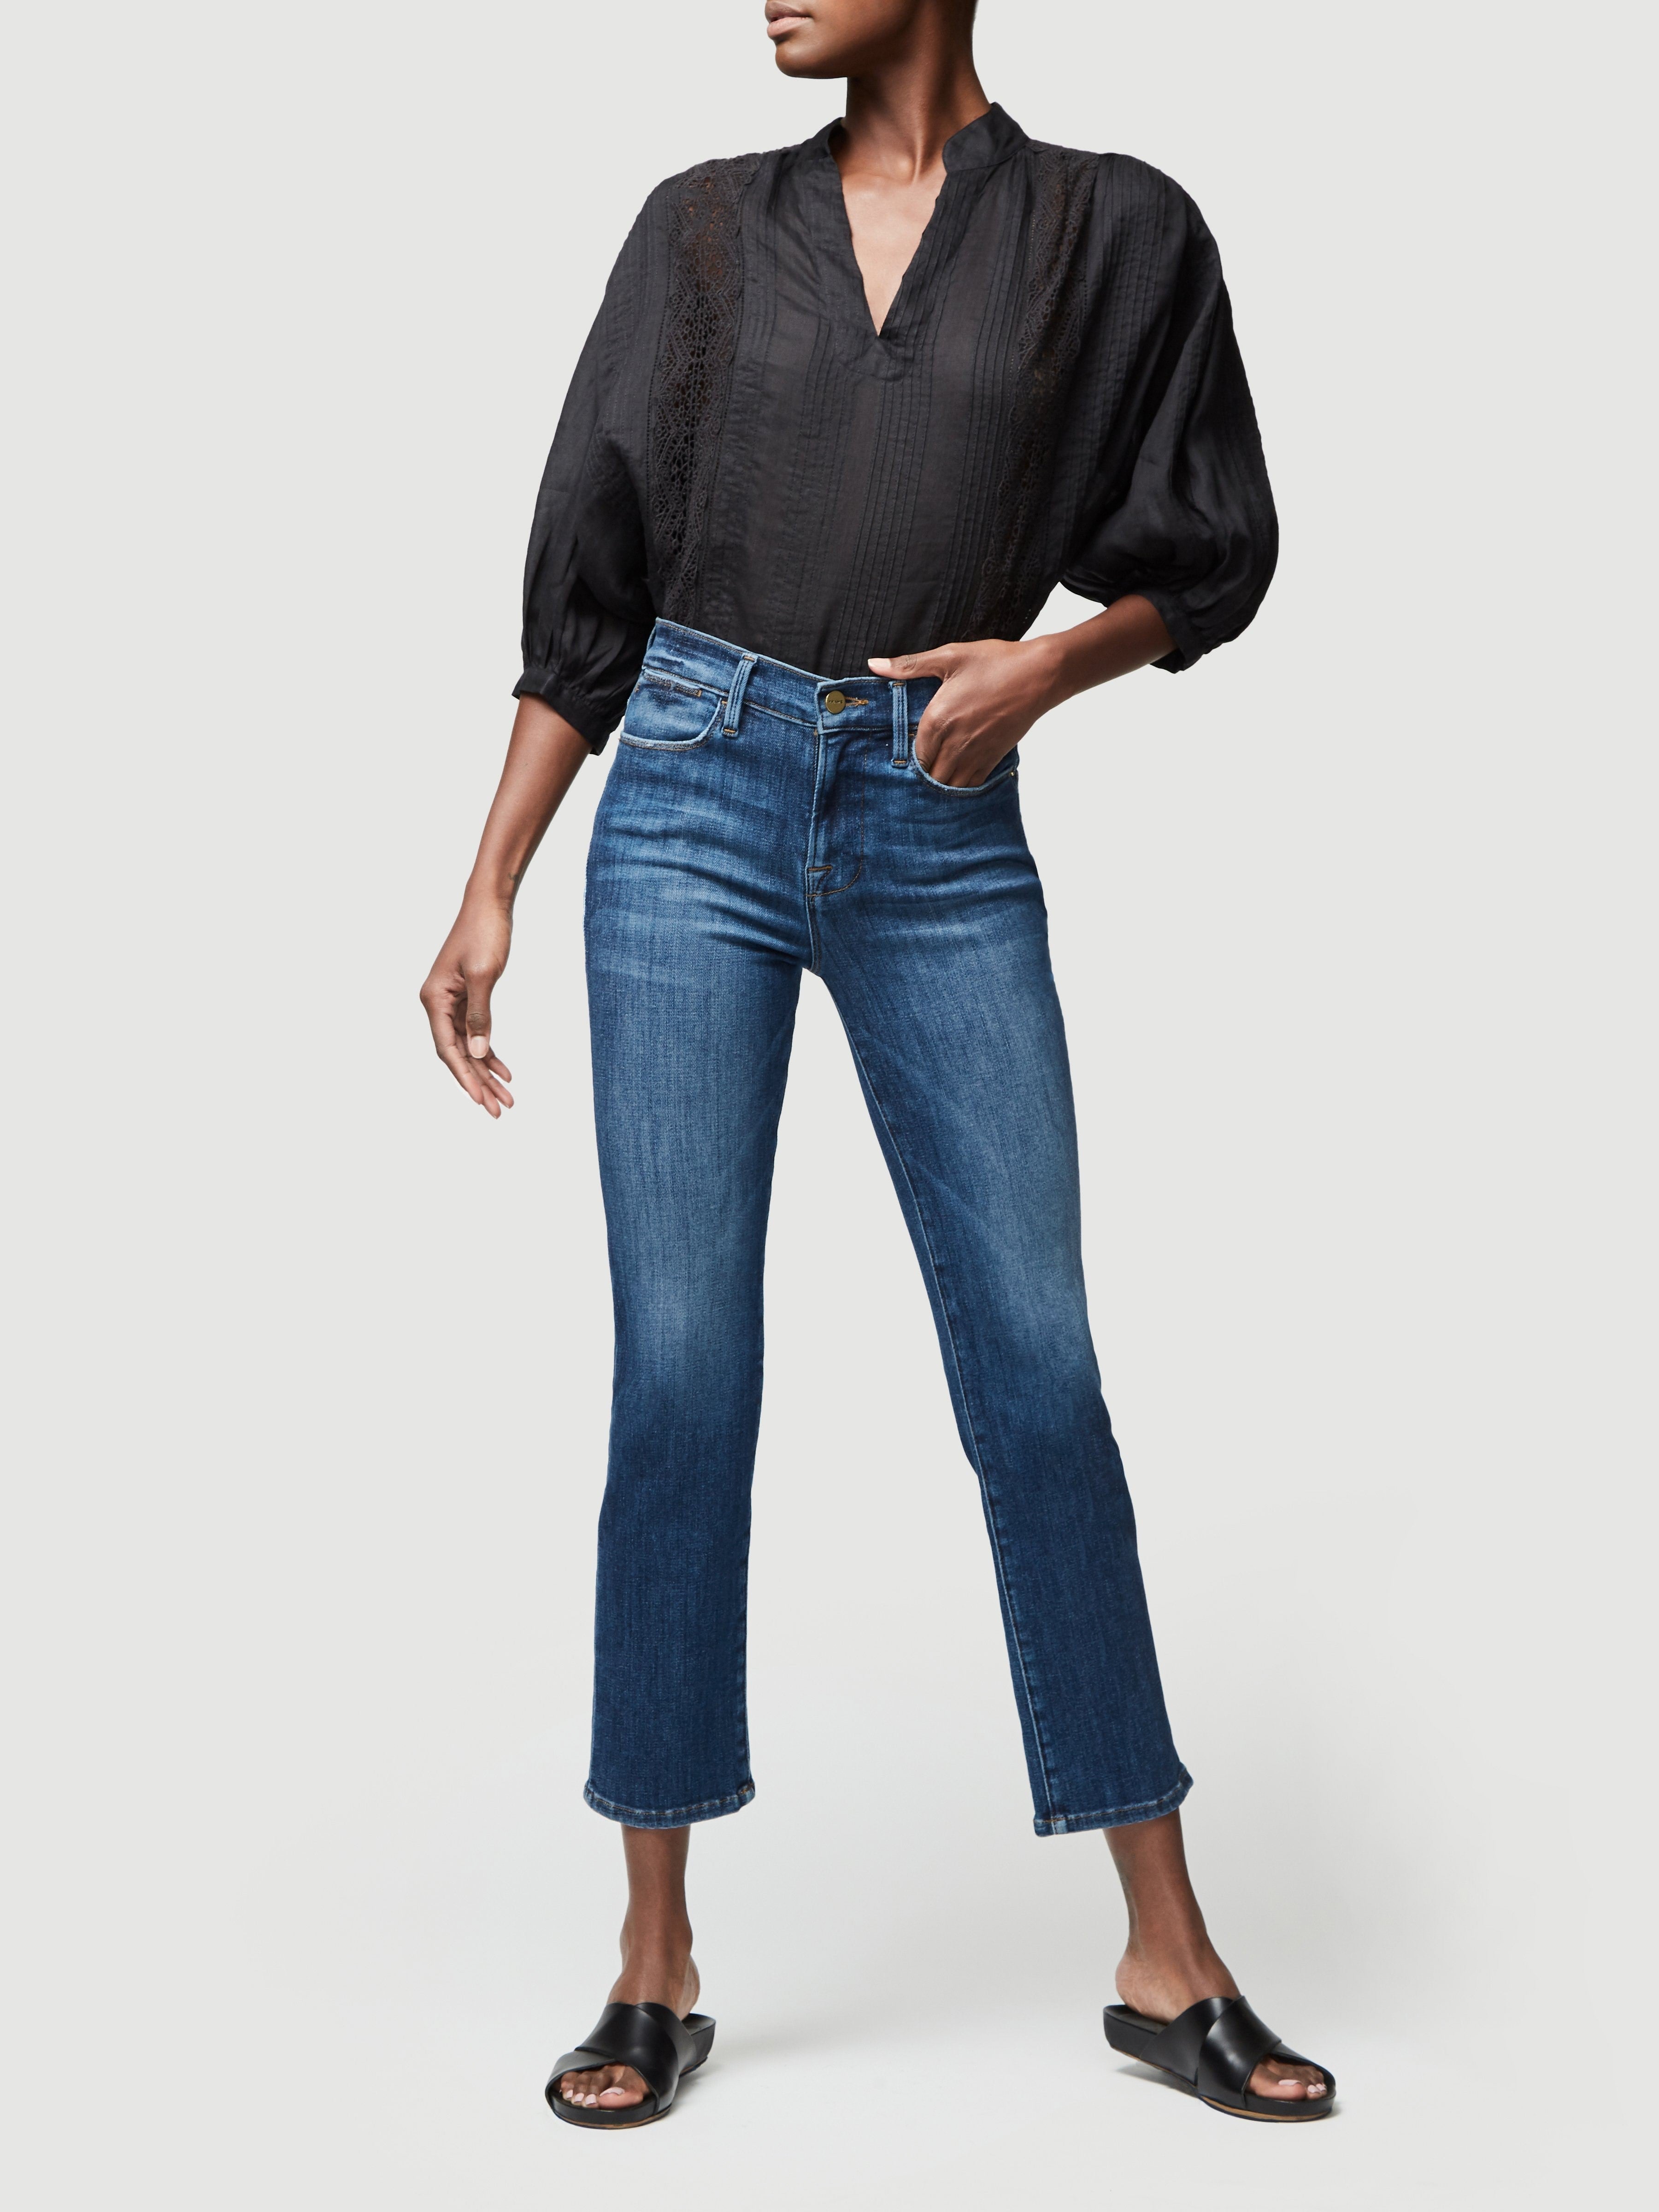 7 Best Boyfriend Jeans for a Laid-Back Look: Agolde, FRAME, & More